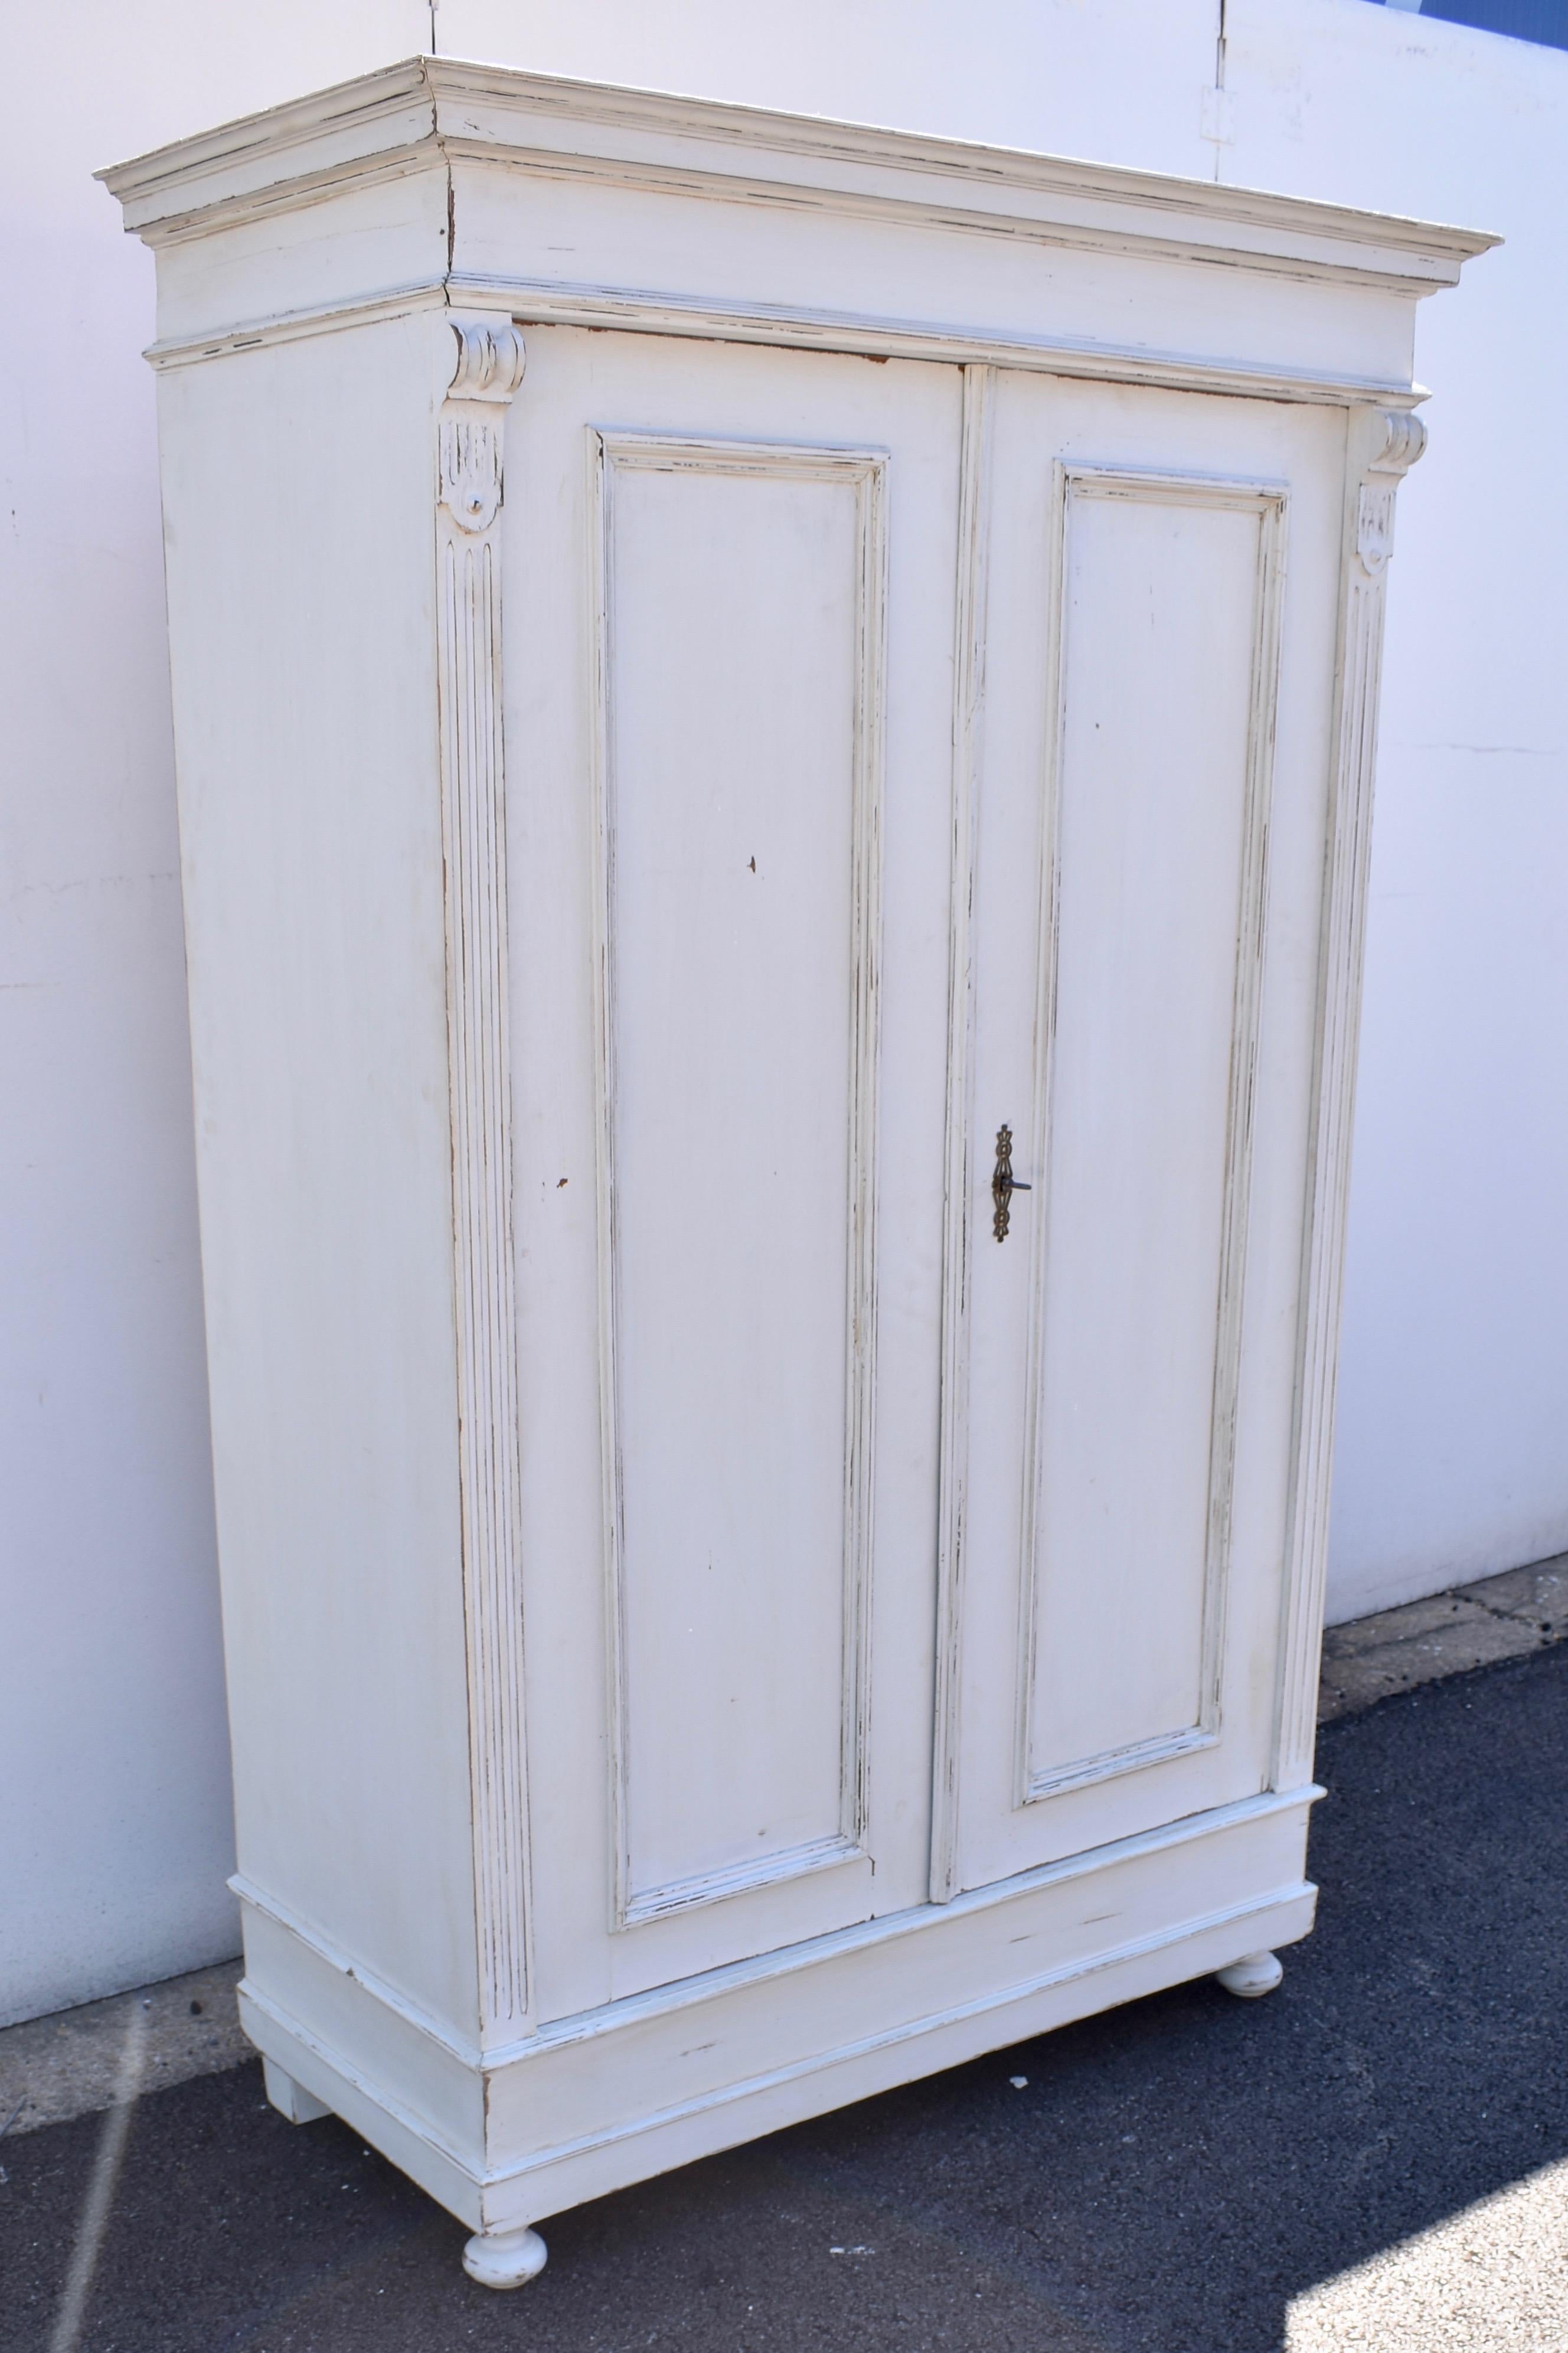 In its classic late nineteenth century German form, this oak armoire has a bold crown molding and frieze above two pivot-hinged flat paneled doors, with applied fluting and corbels on the front corners. The interior has a single shelf above a